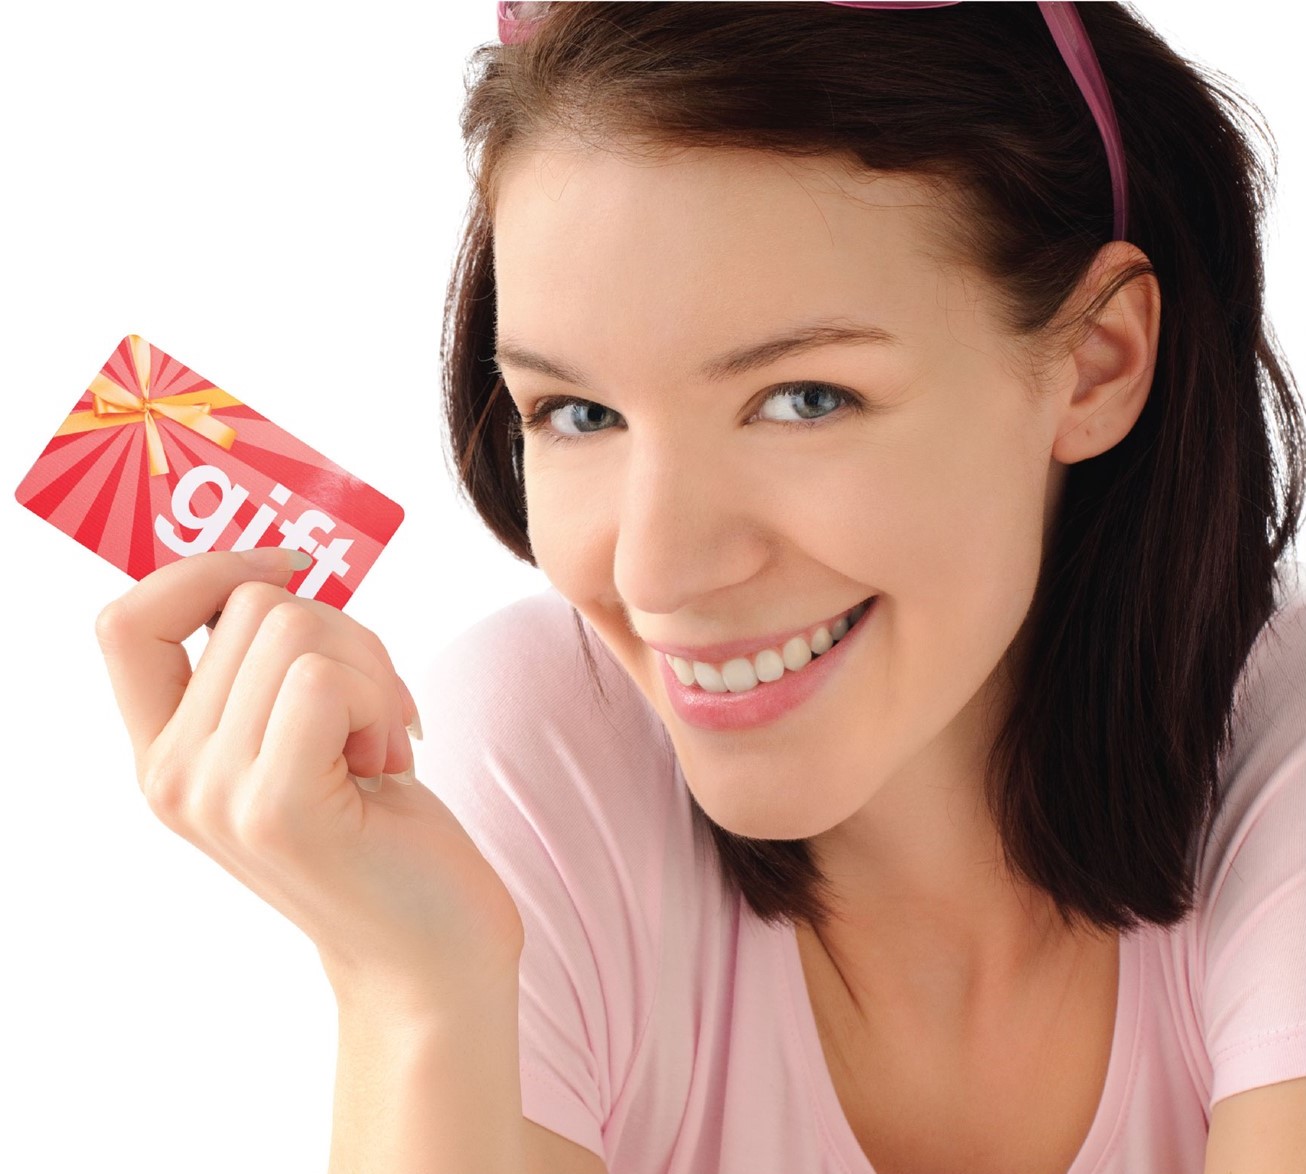 Lady with brunette hair smiling and holding a Gift Card in her hand.